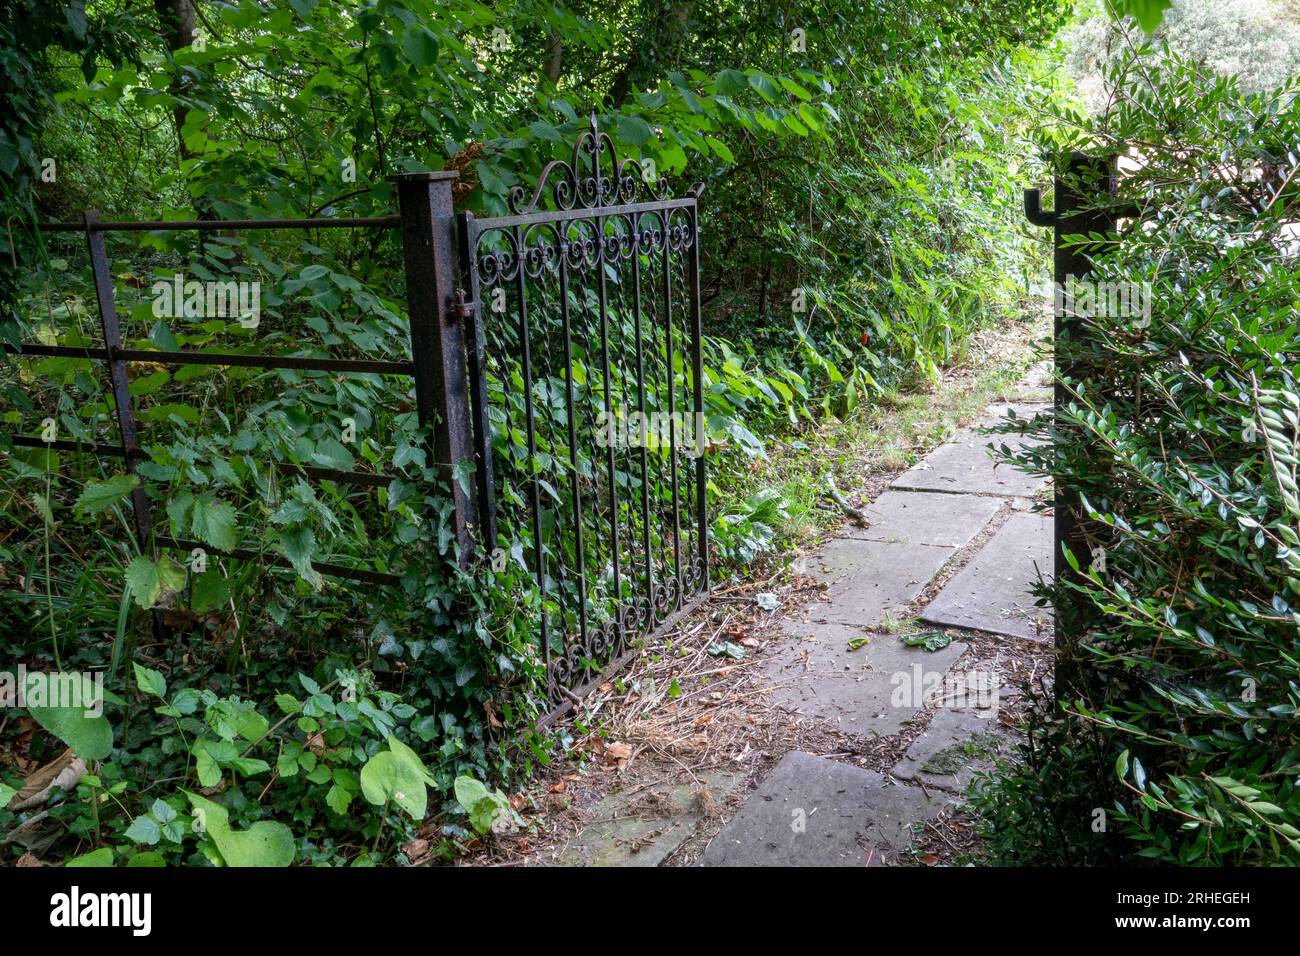 An open wrought iron garden gate allowing access to a slab pathway surrounded by rich shrubbery and trees Stock Photo